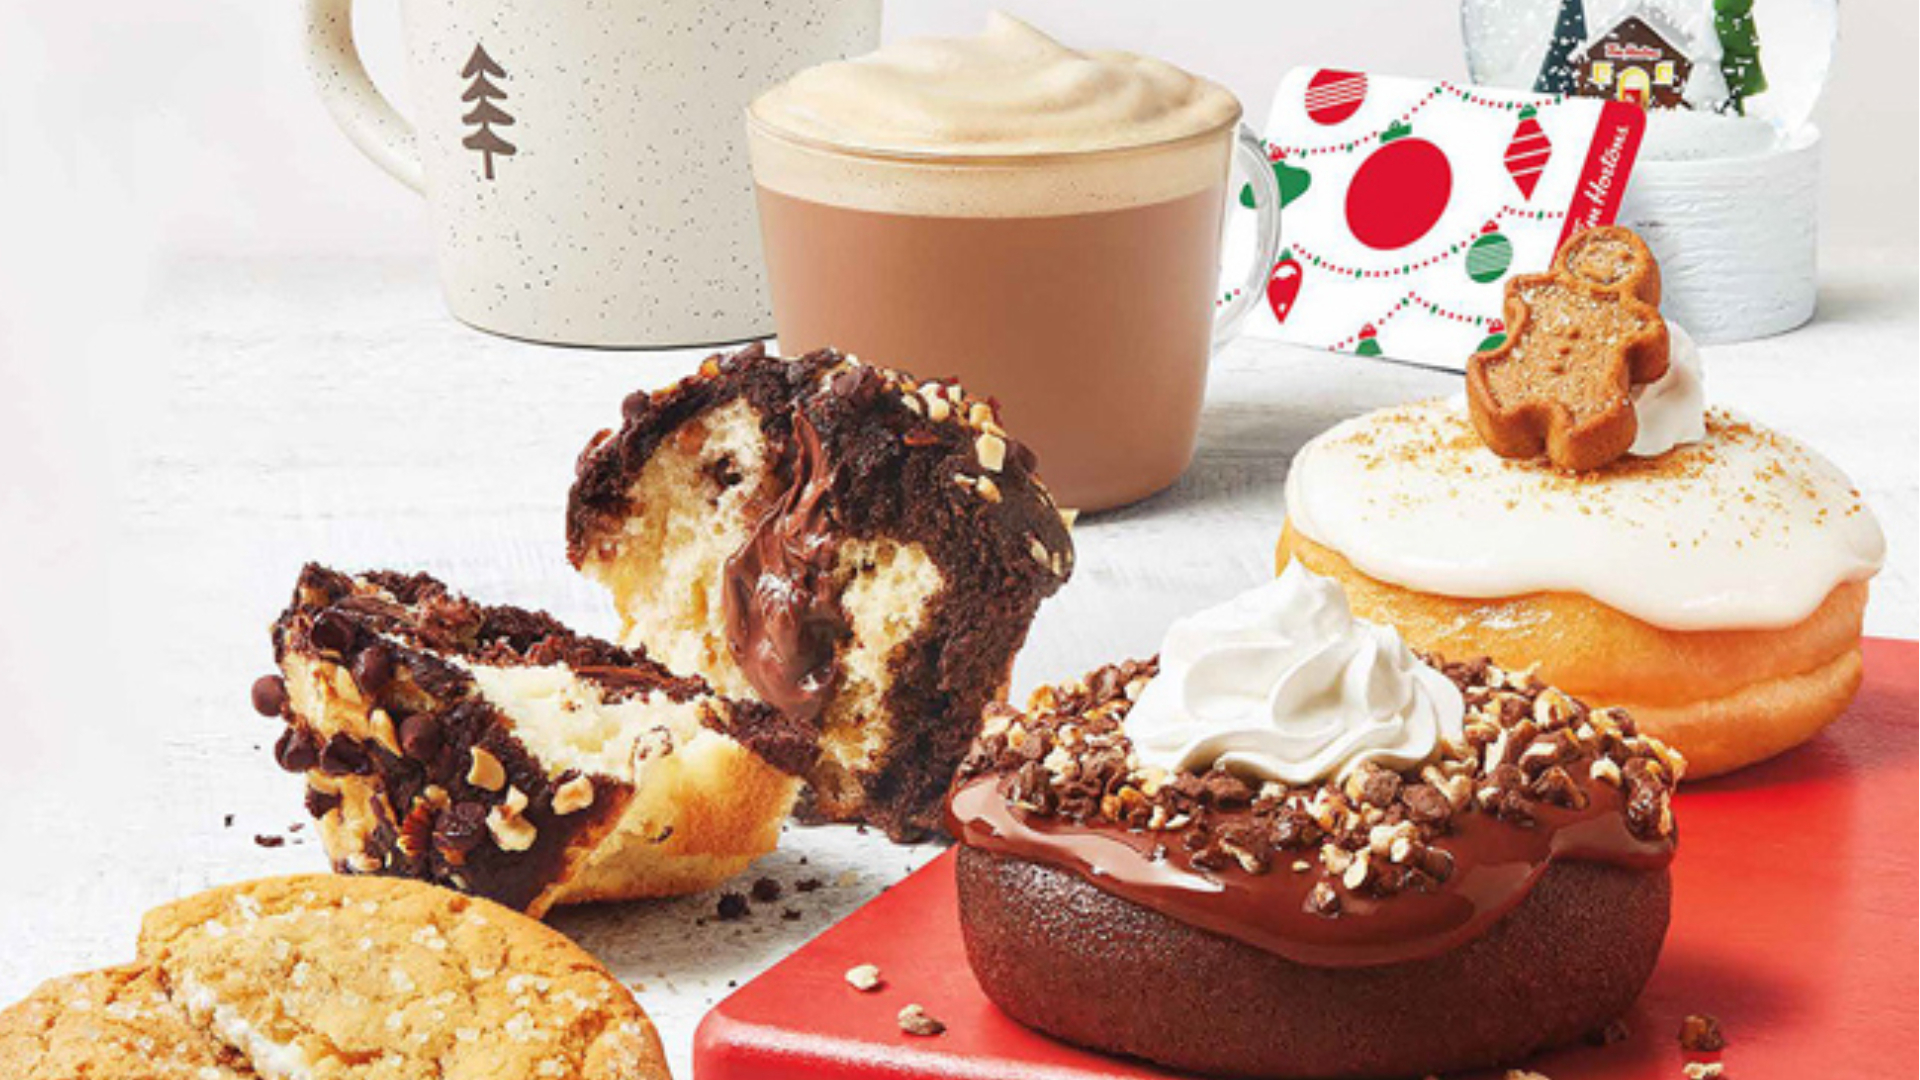 A look at Tim Hortons’ new festive Holiday Collection